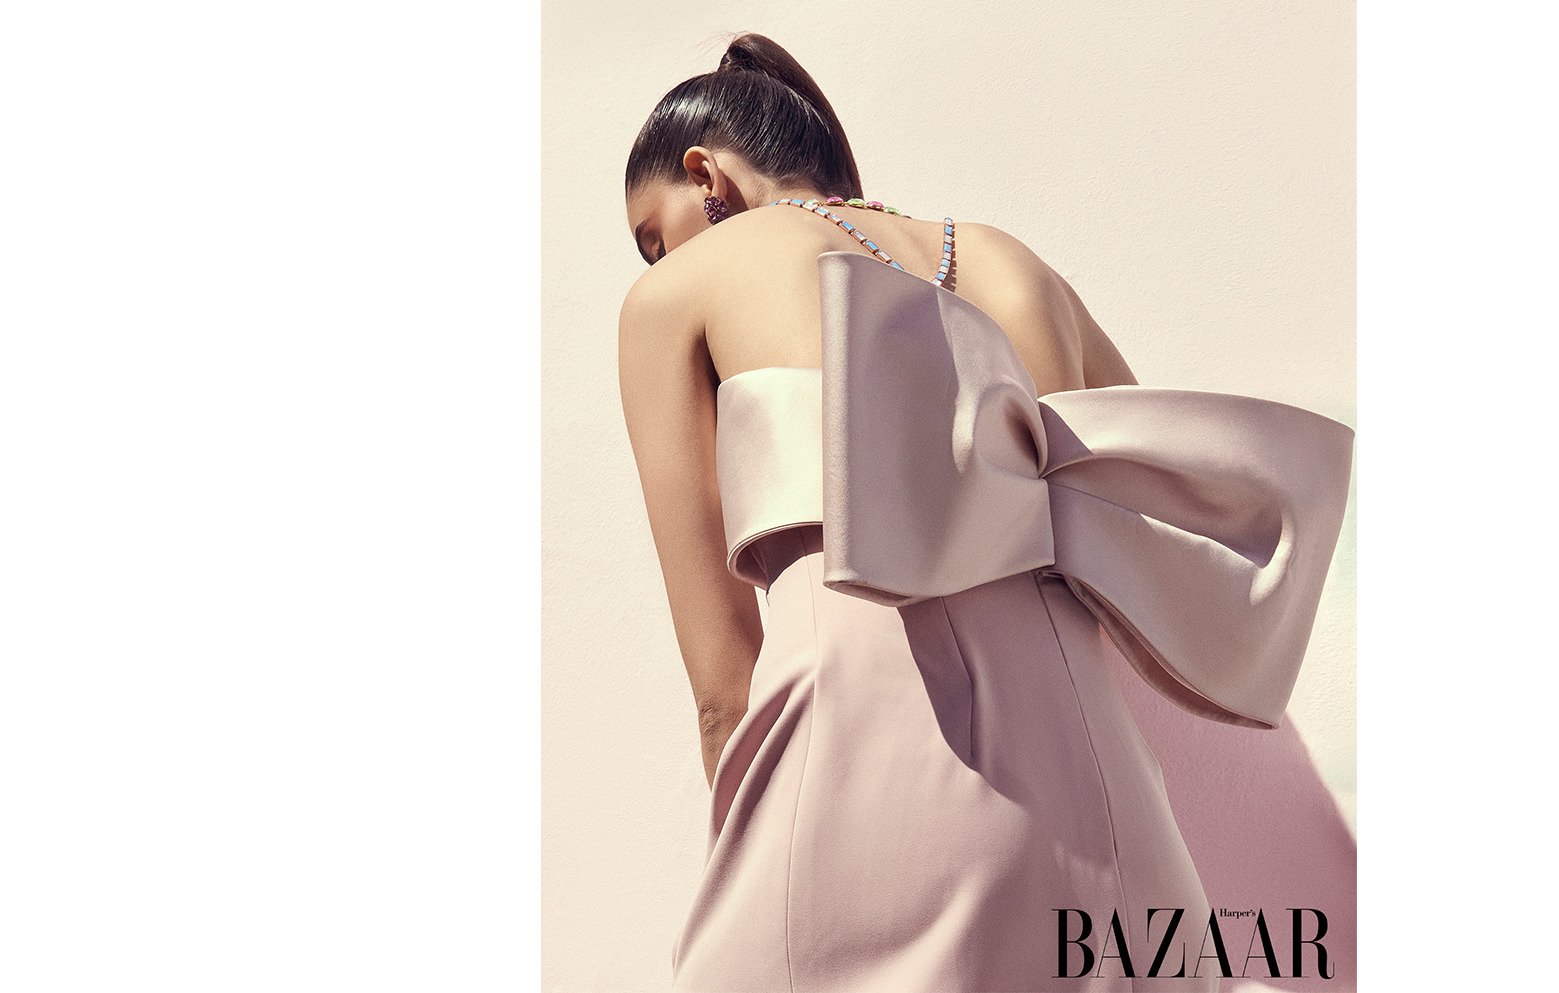  Sabrina dances through the West London streets with falling spring blossoms in hues of pink for Harpers Bazaar,   